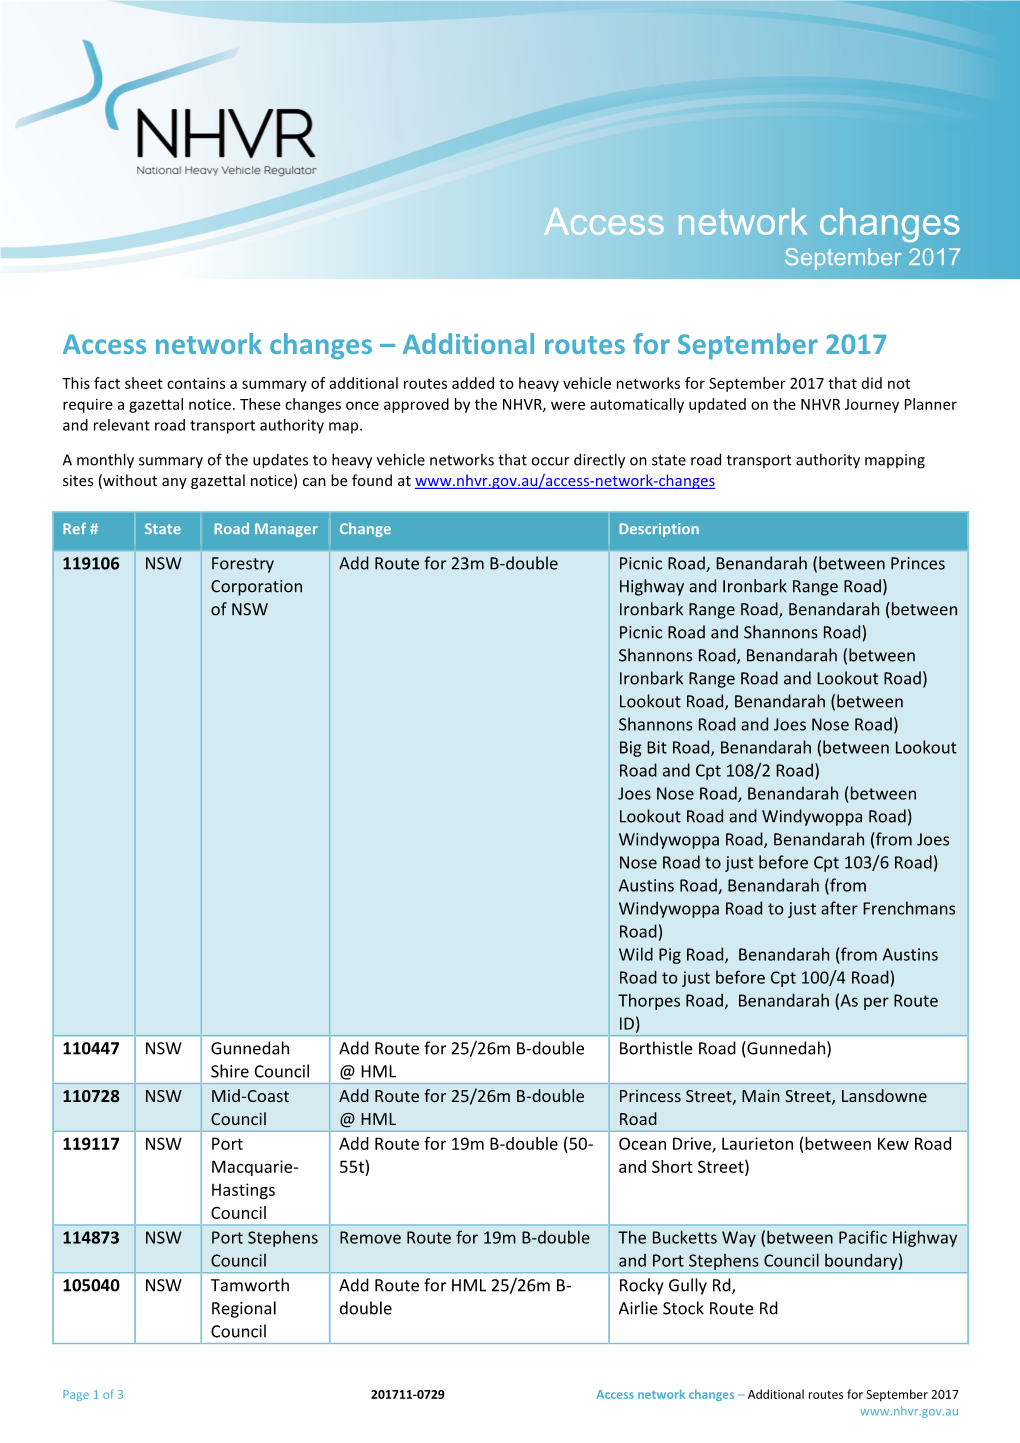 Access Network Changes September 2017